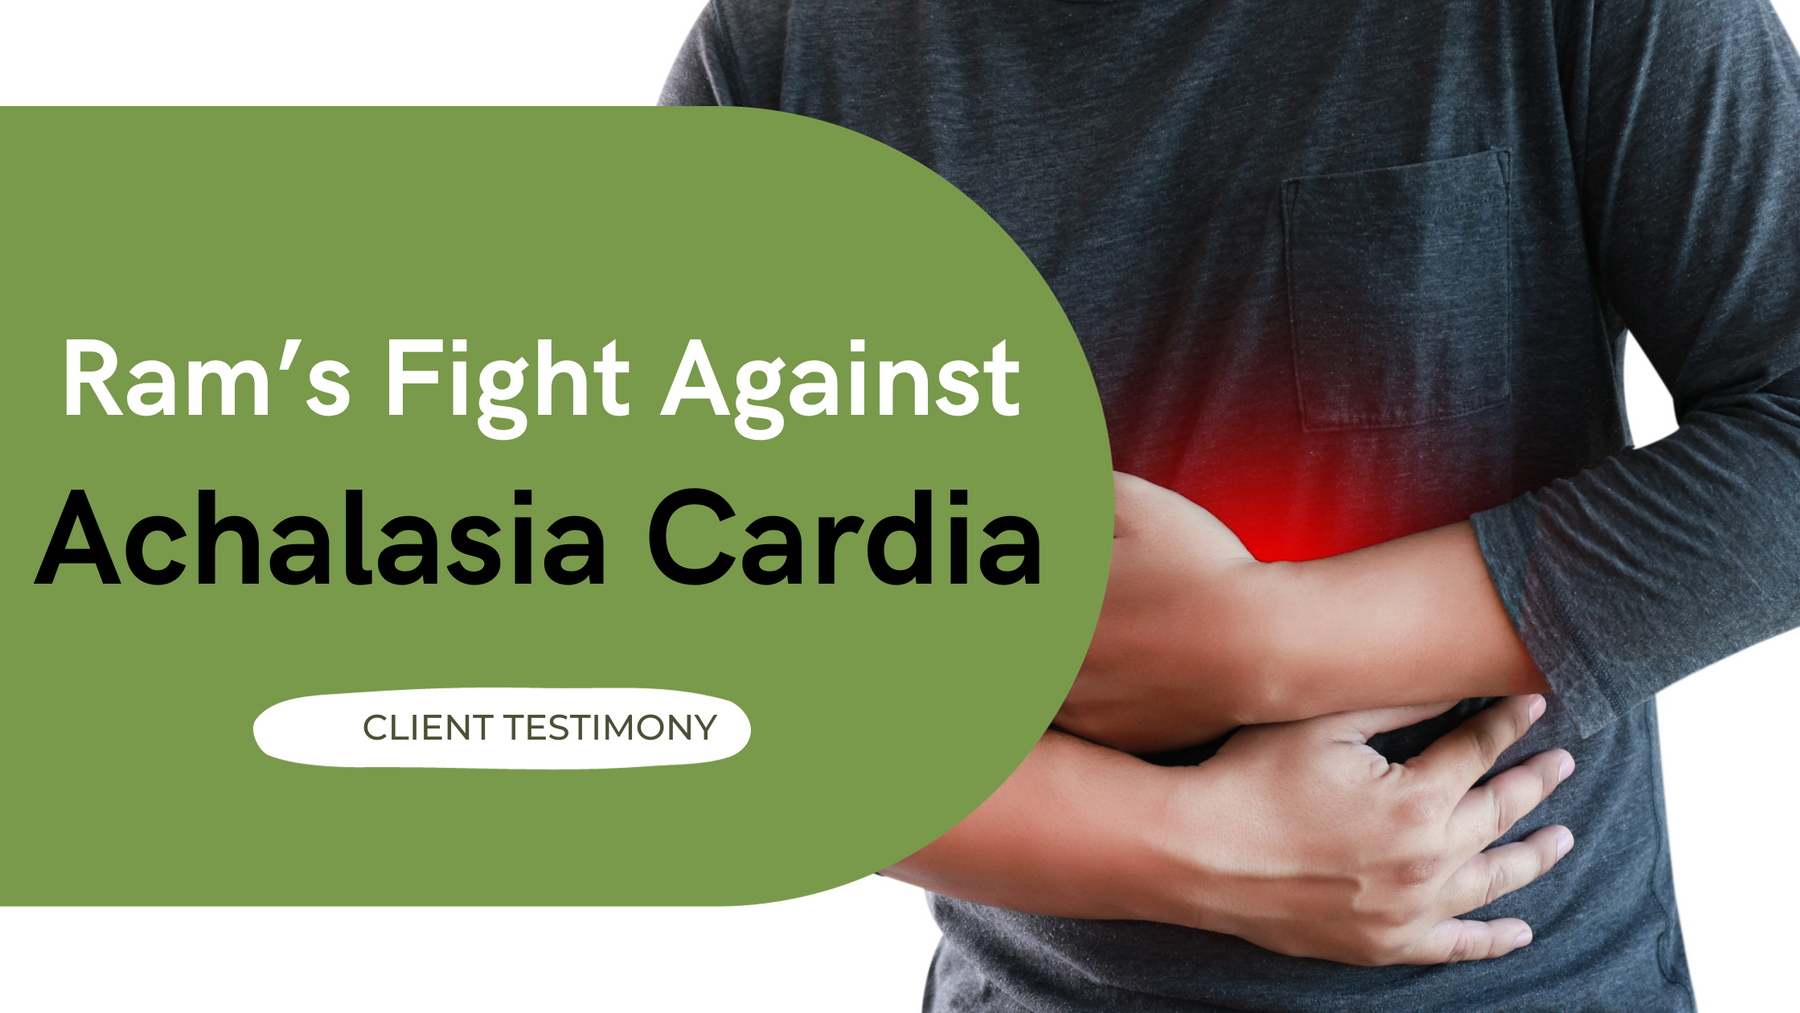 Can Achalasia Cardia Be Reversed? A Client's Testimony.